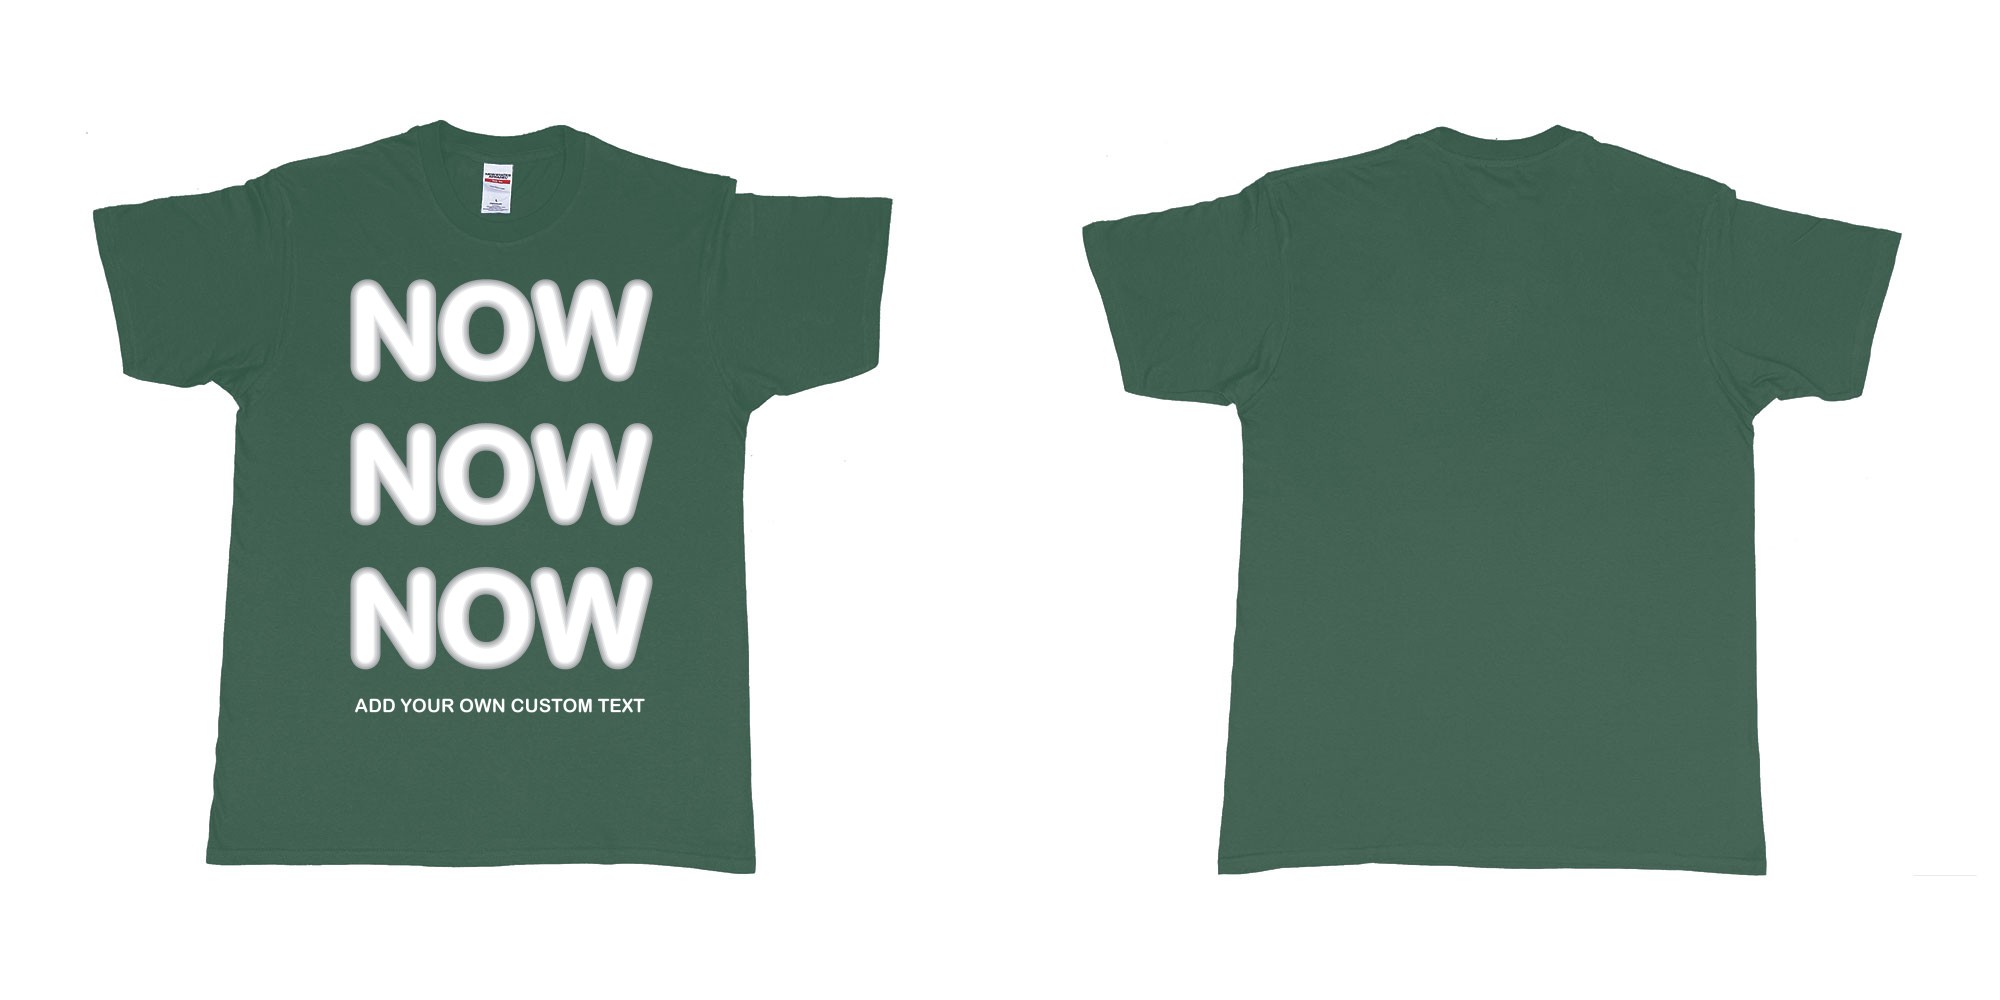 Custom tshirt design now now now add custom text tees in fabric color forest-green choice your own text made in Bali by The Pirate Way